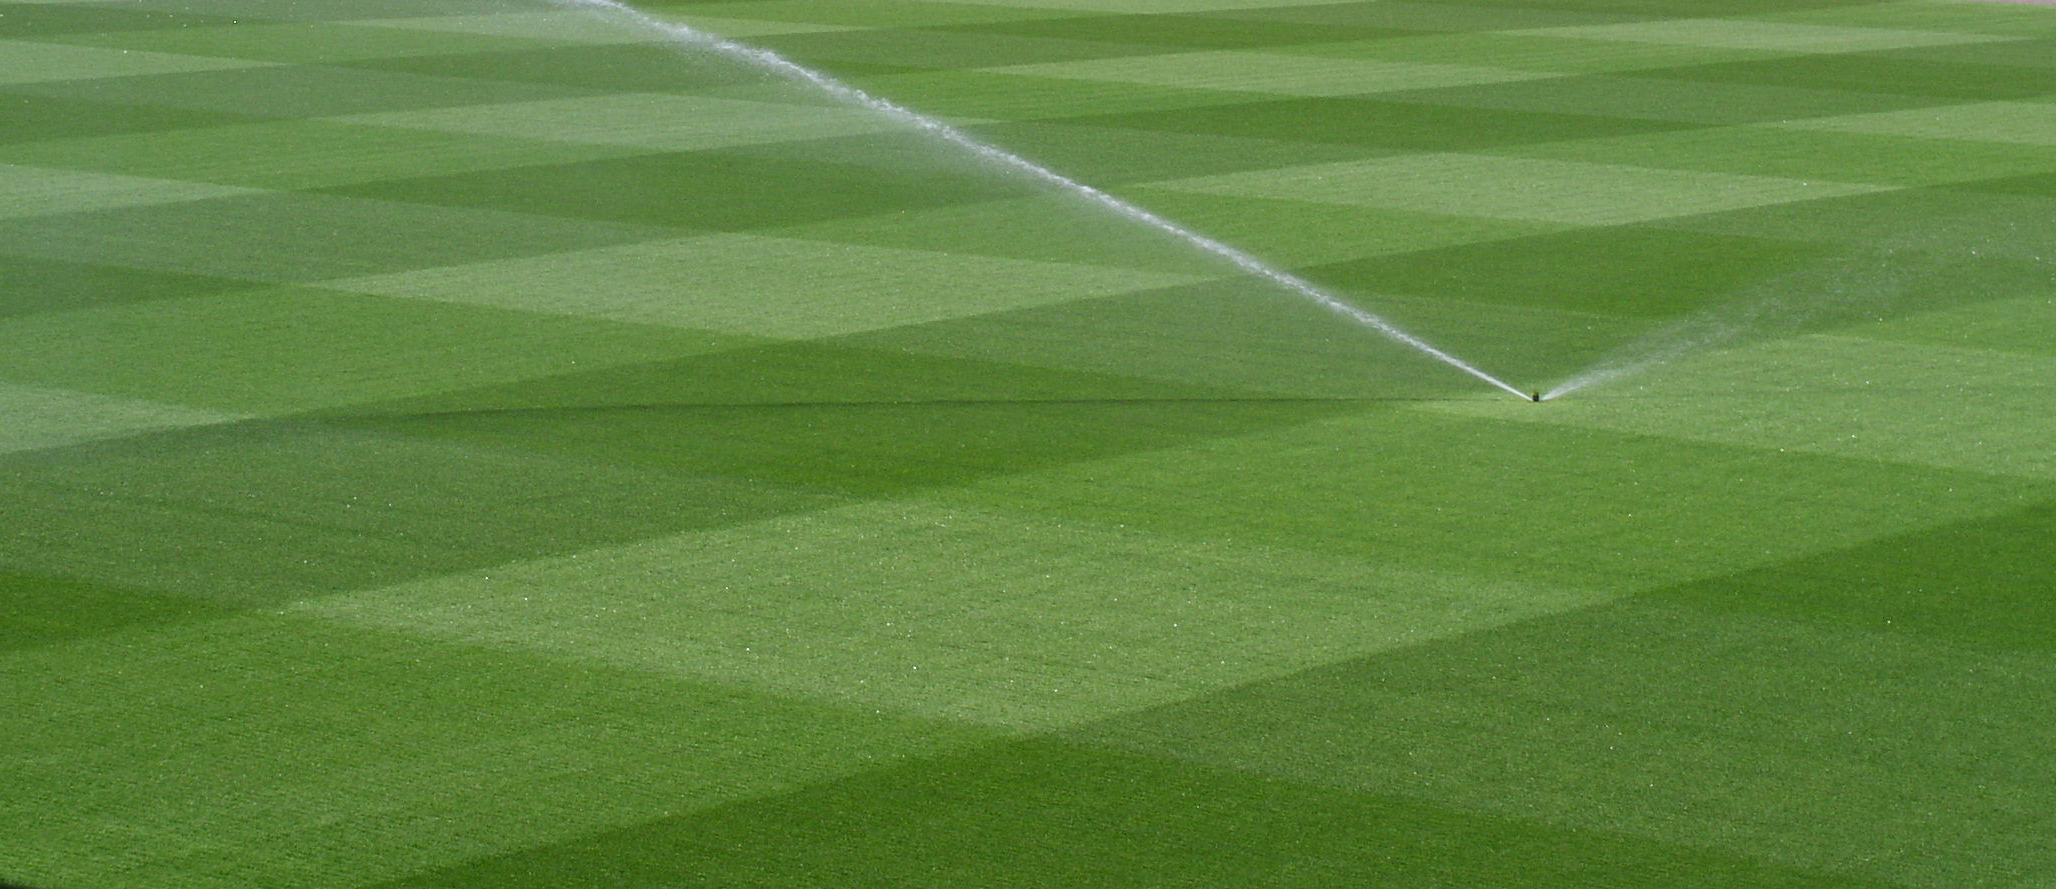 Top-rated perennial ryegrass joins the A20 squad